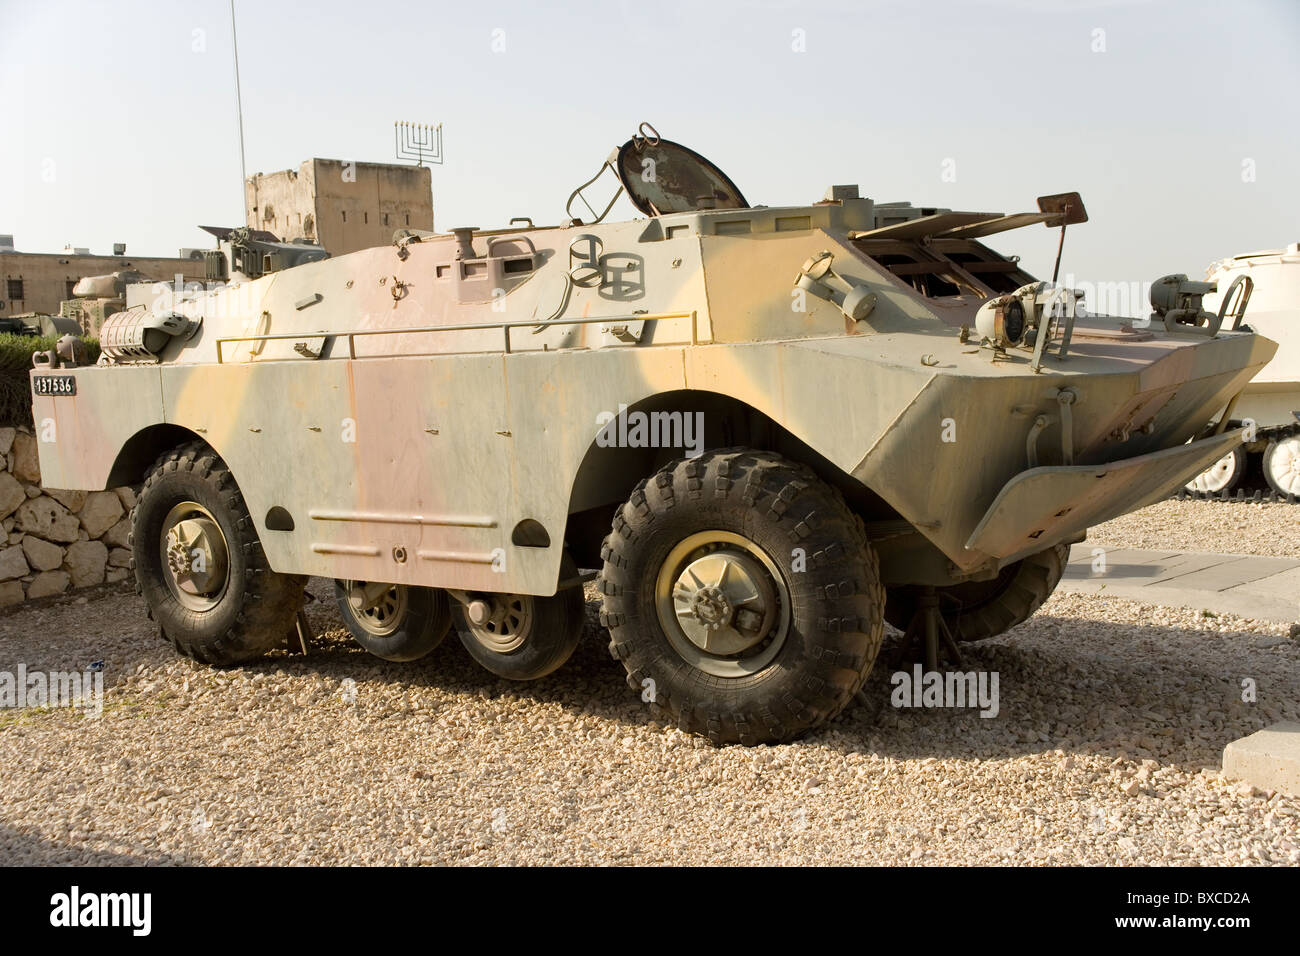 BRDM-2 Amphibious Command Vehicle at the Israeli Armored Corps Museum at Latrun, Israel Stock Photo